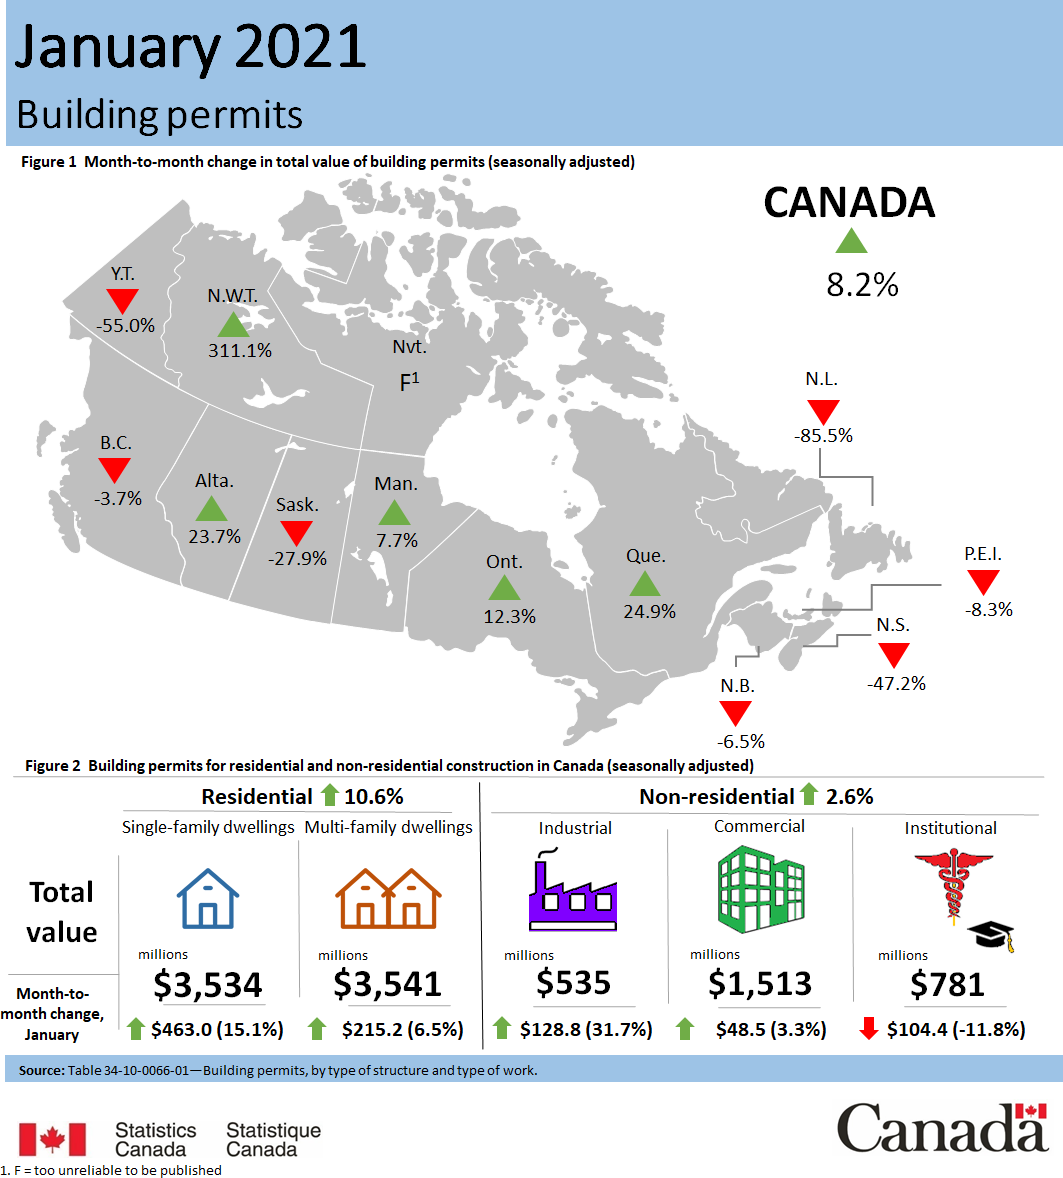 Thumbnail for Infographic 1: Building permits, January 2021